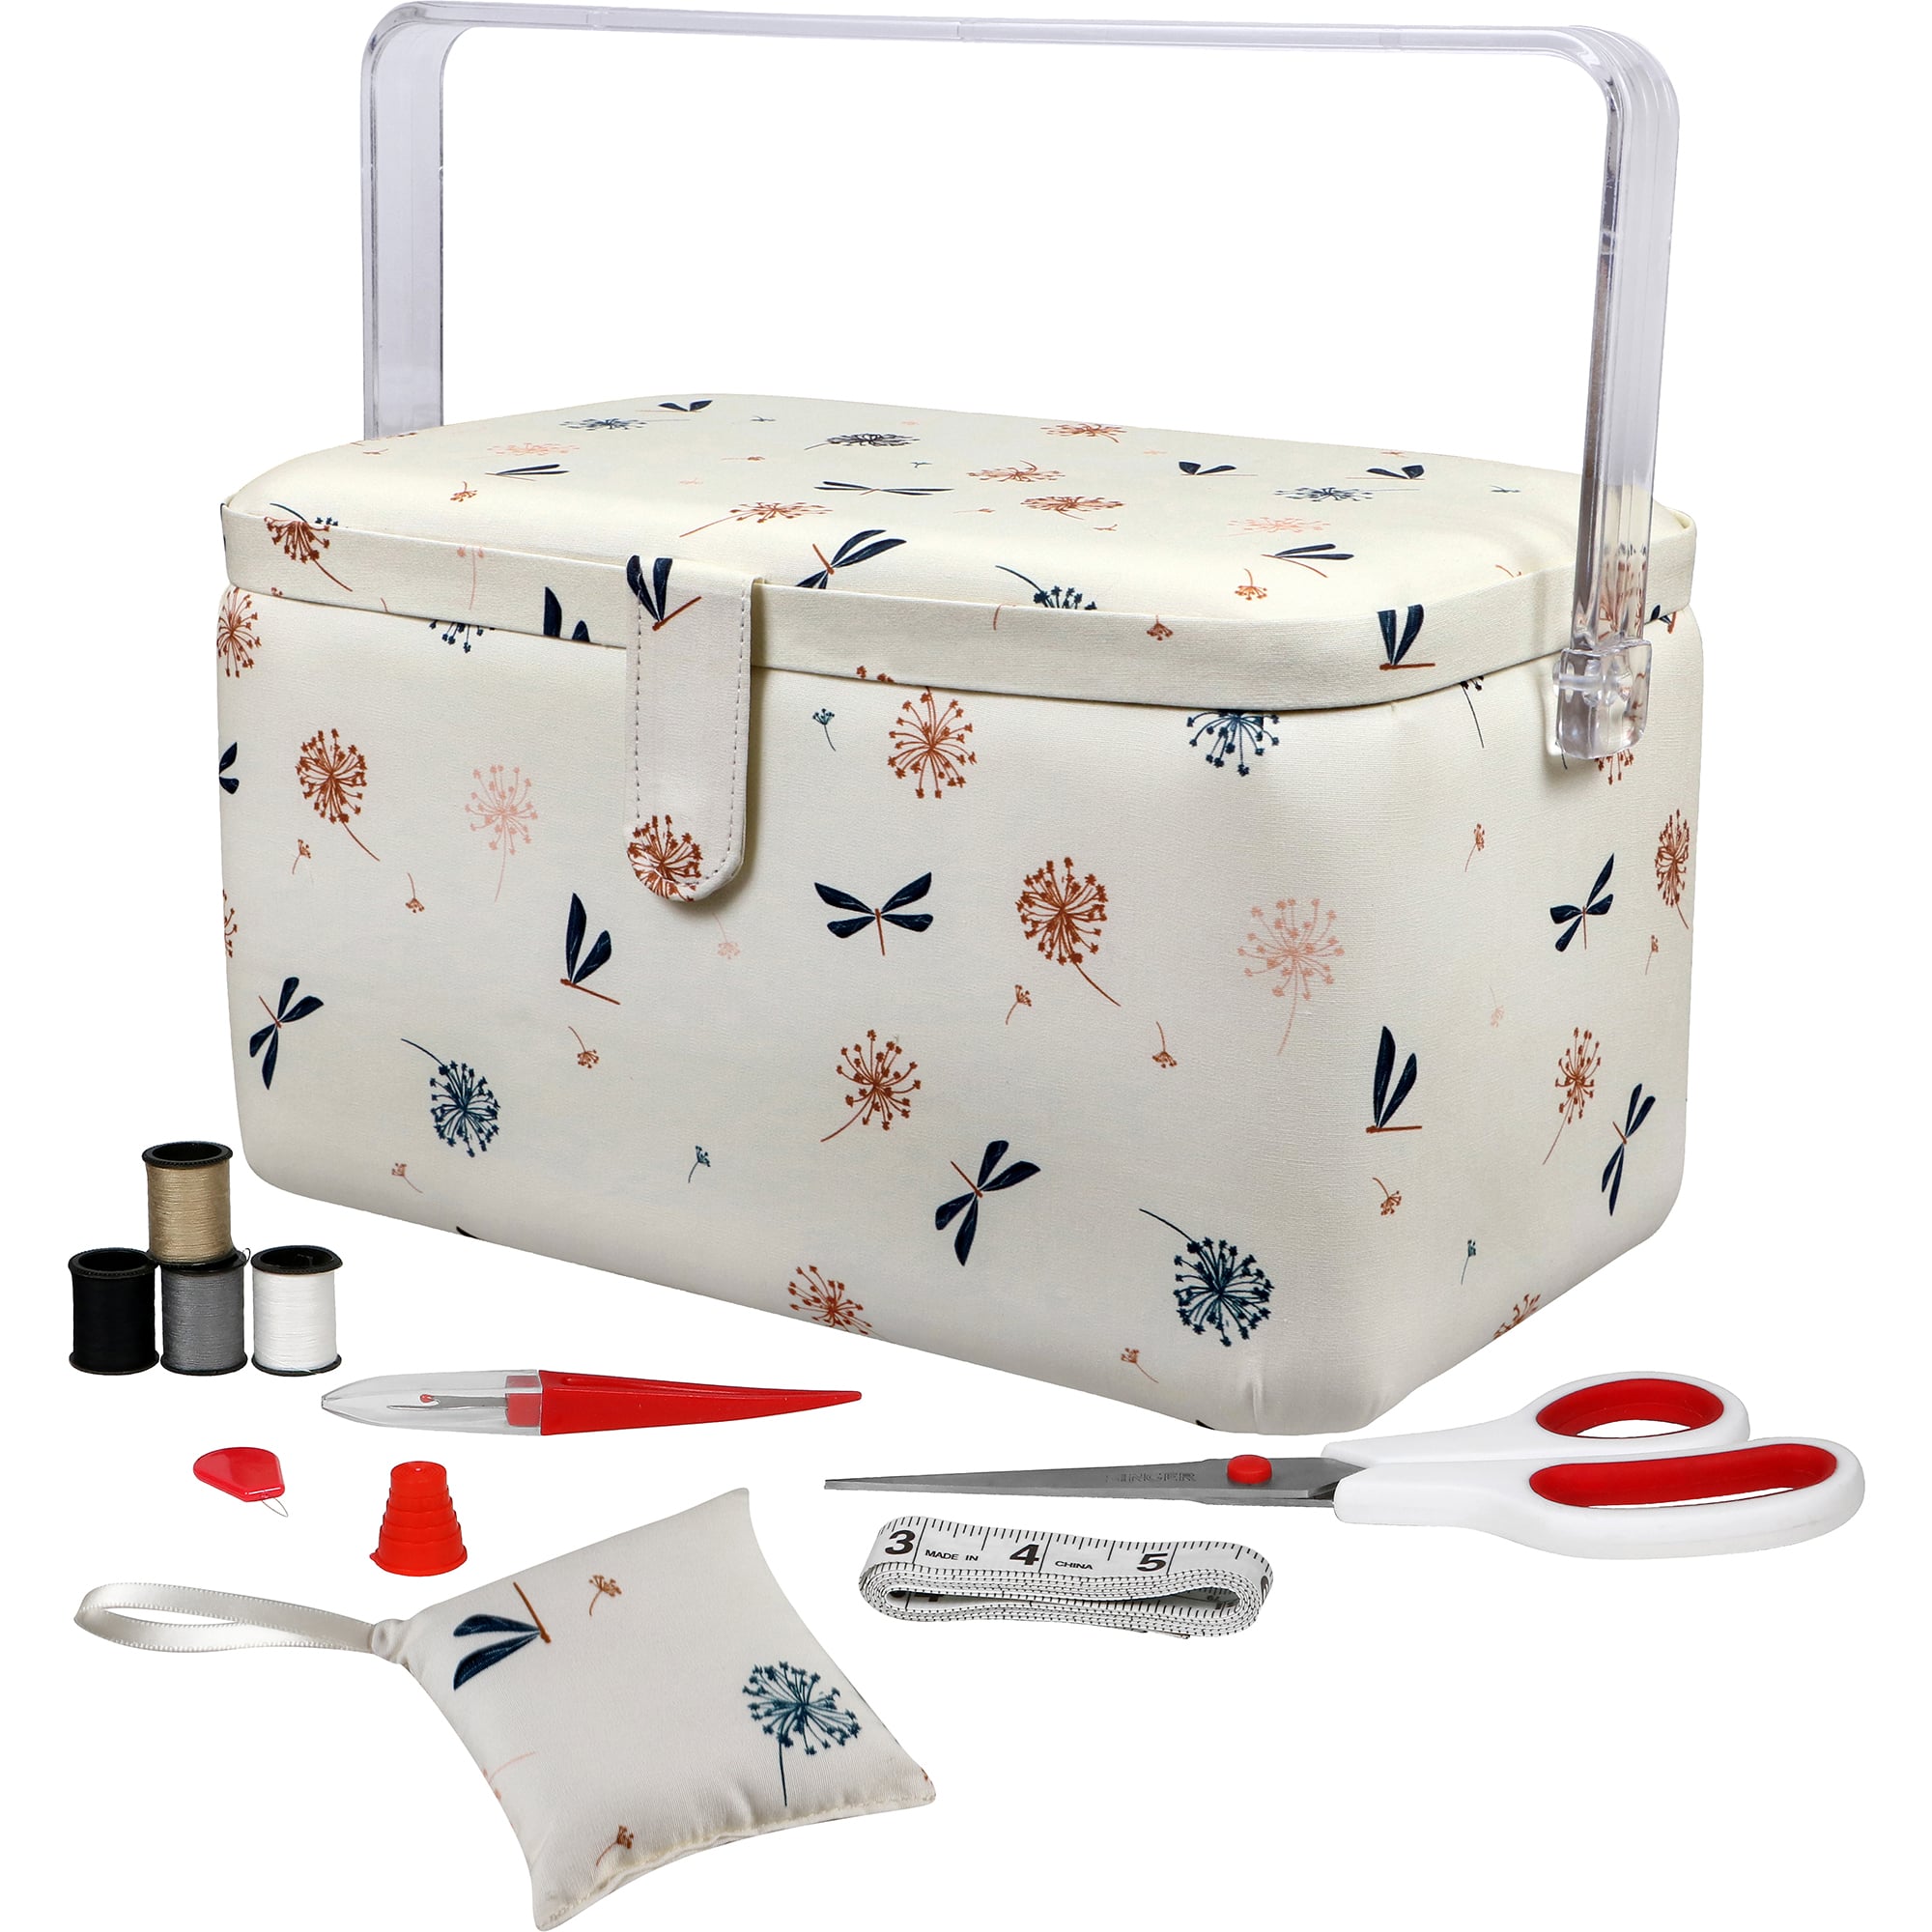 SINGER Sewing Basket with Sewing Kit, Needles, Thread, Scissors, and  Notions- White